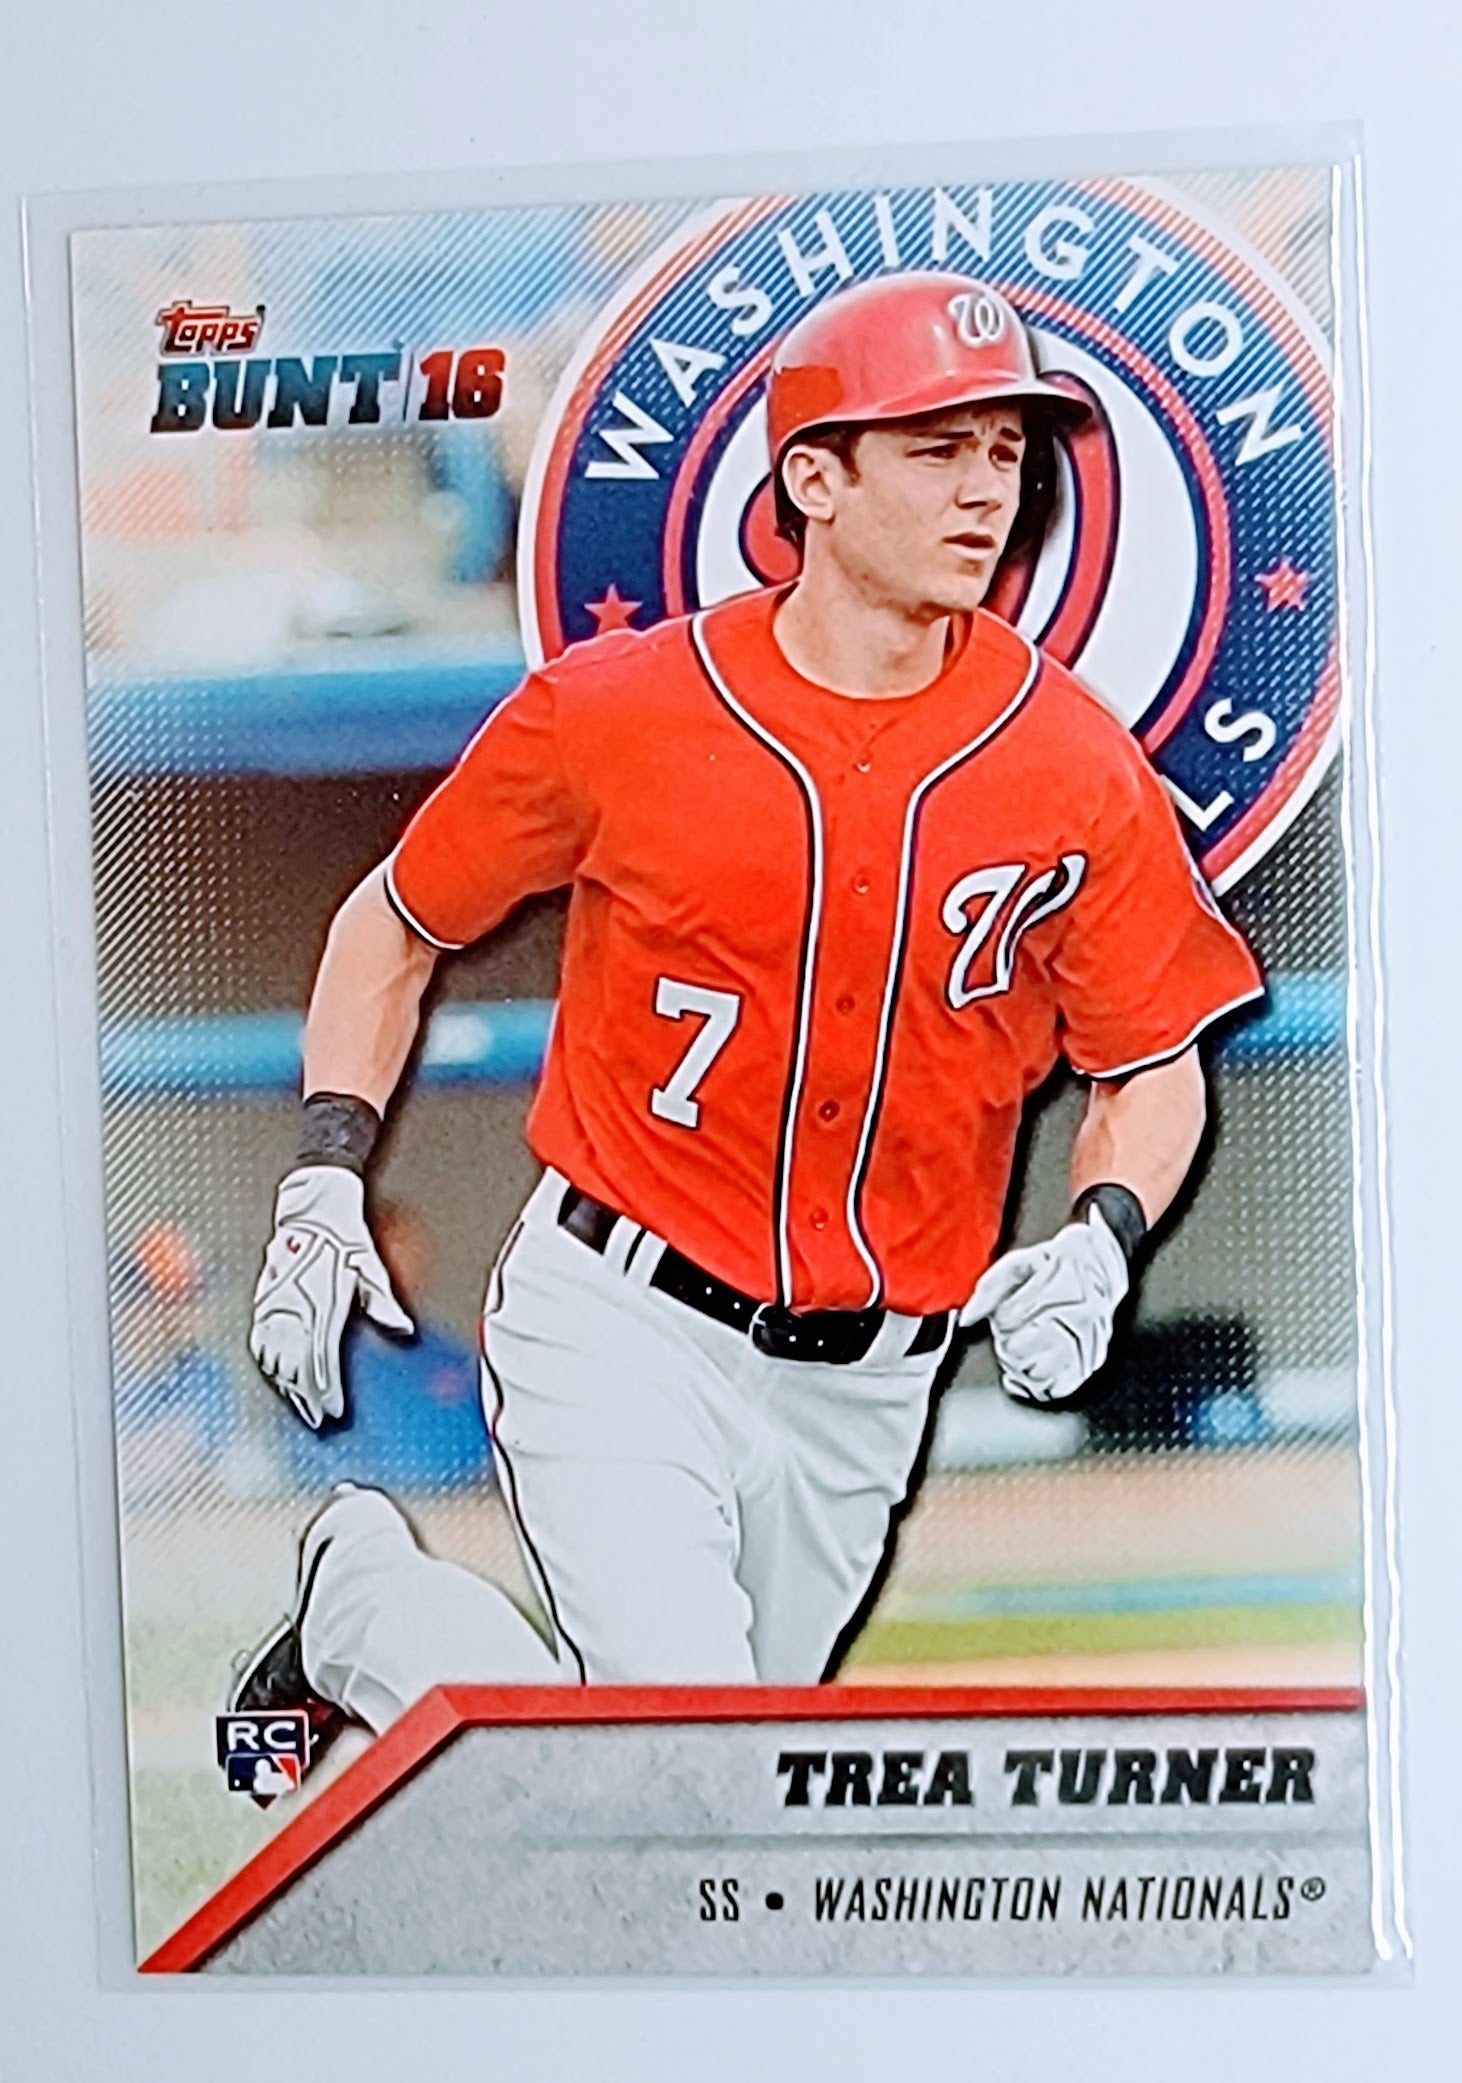 2016 Topps Bunt Trea
  Turner   RC Washington Nationals
  Baseball Card  TH1CB simple Xclusive Collectibles   